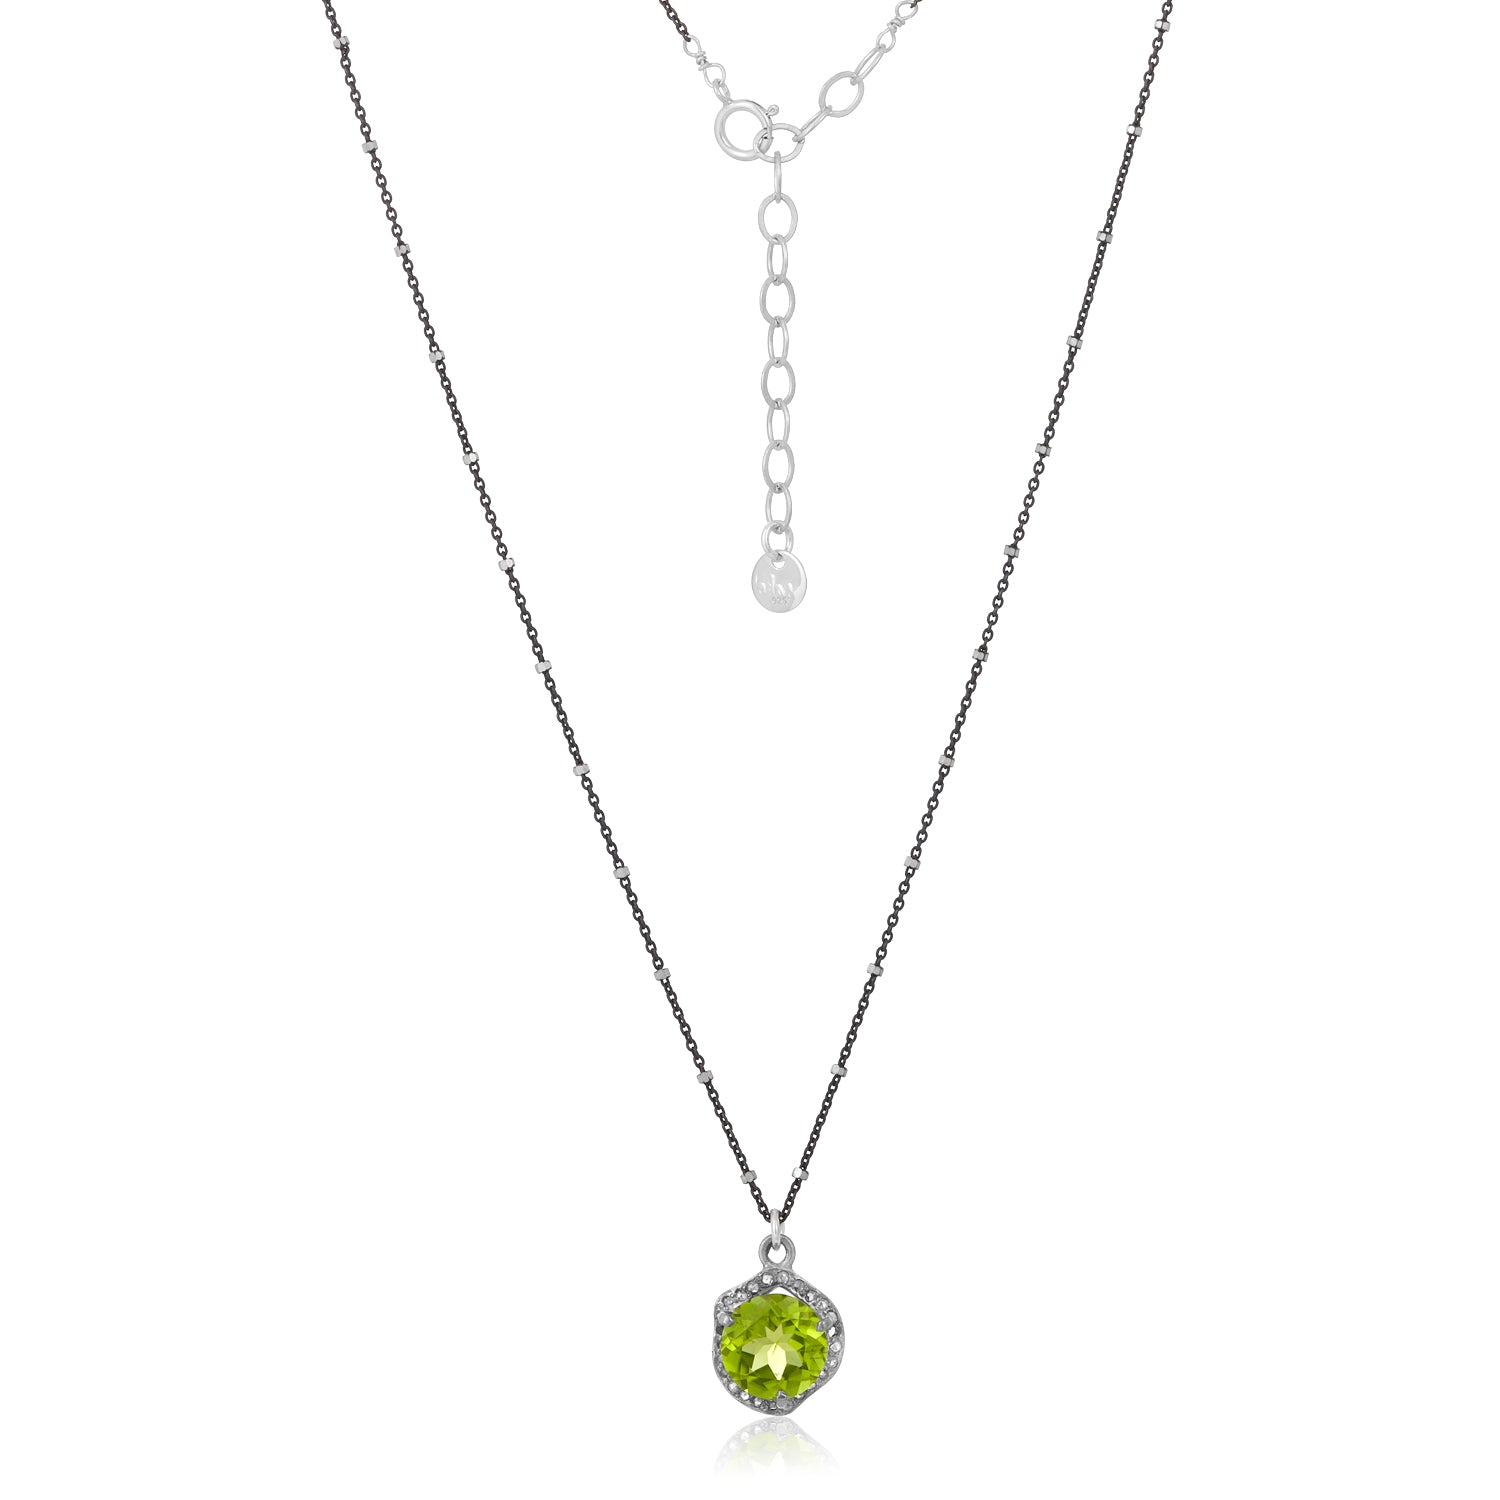 The Heart of Arendelle Necklace - Peridot